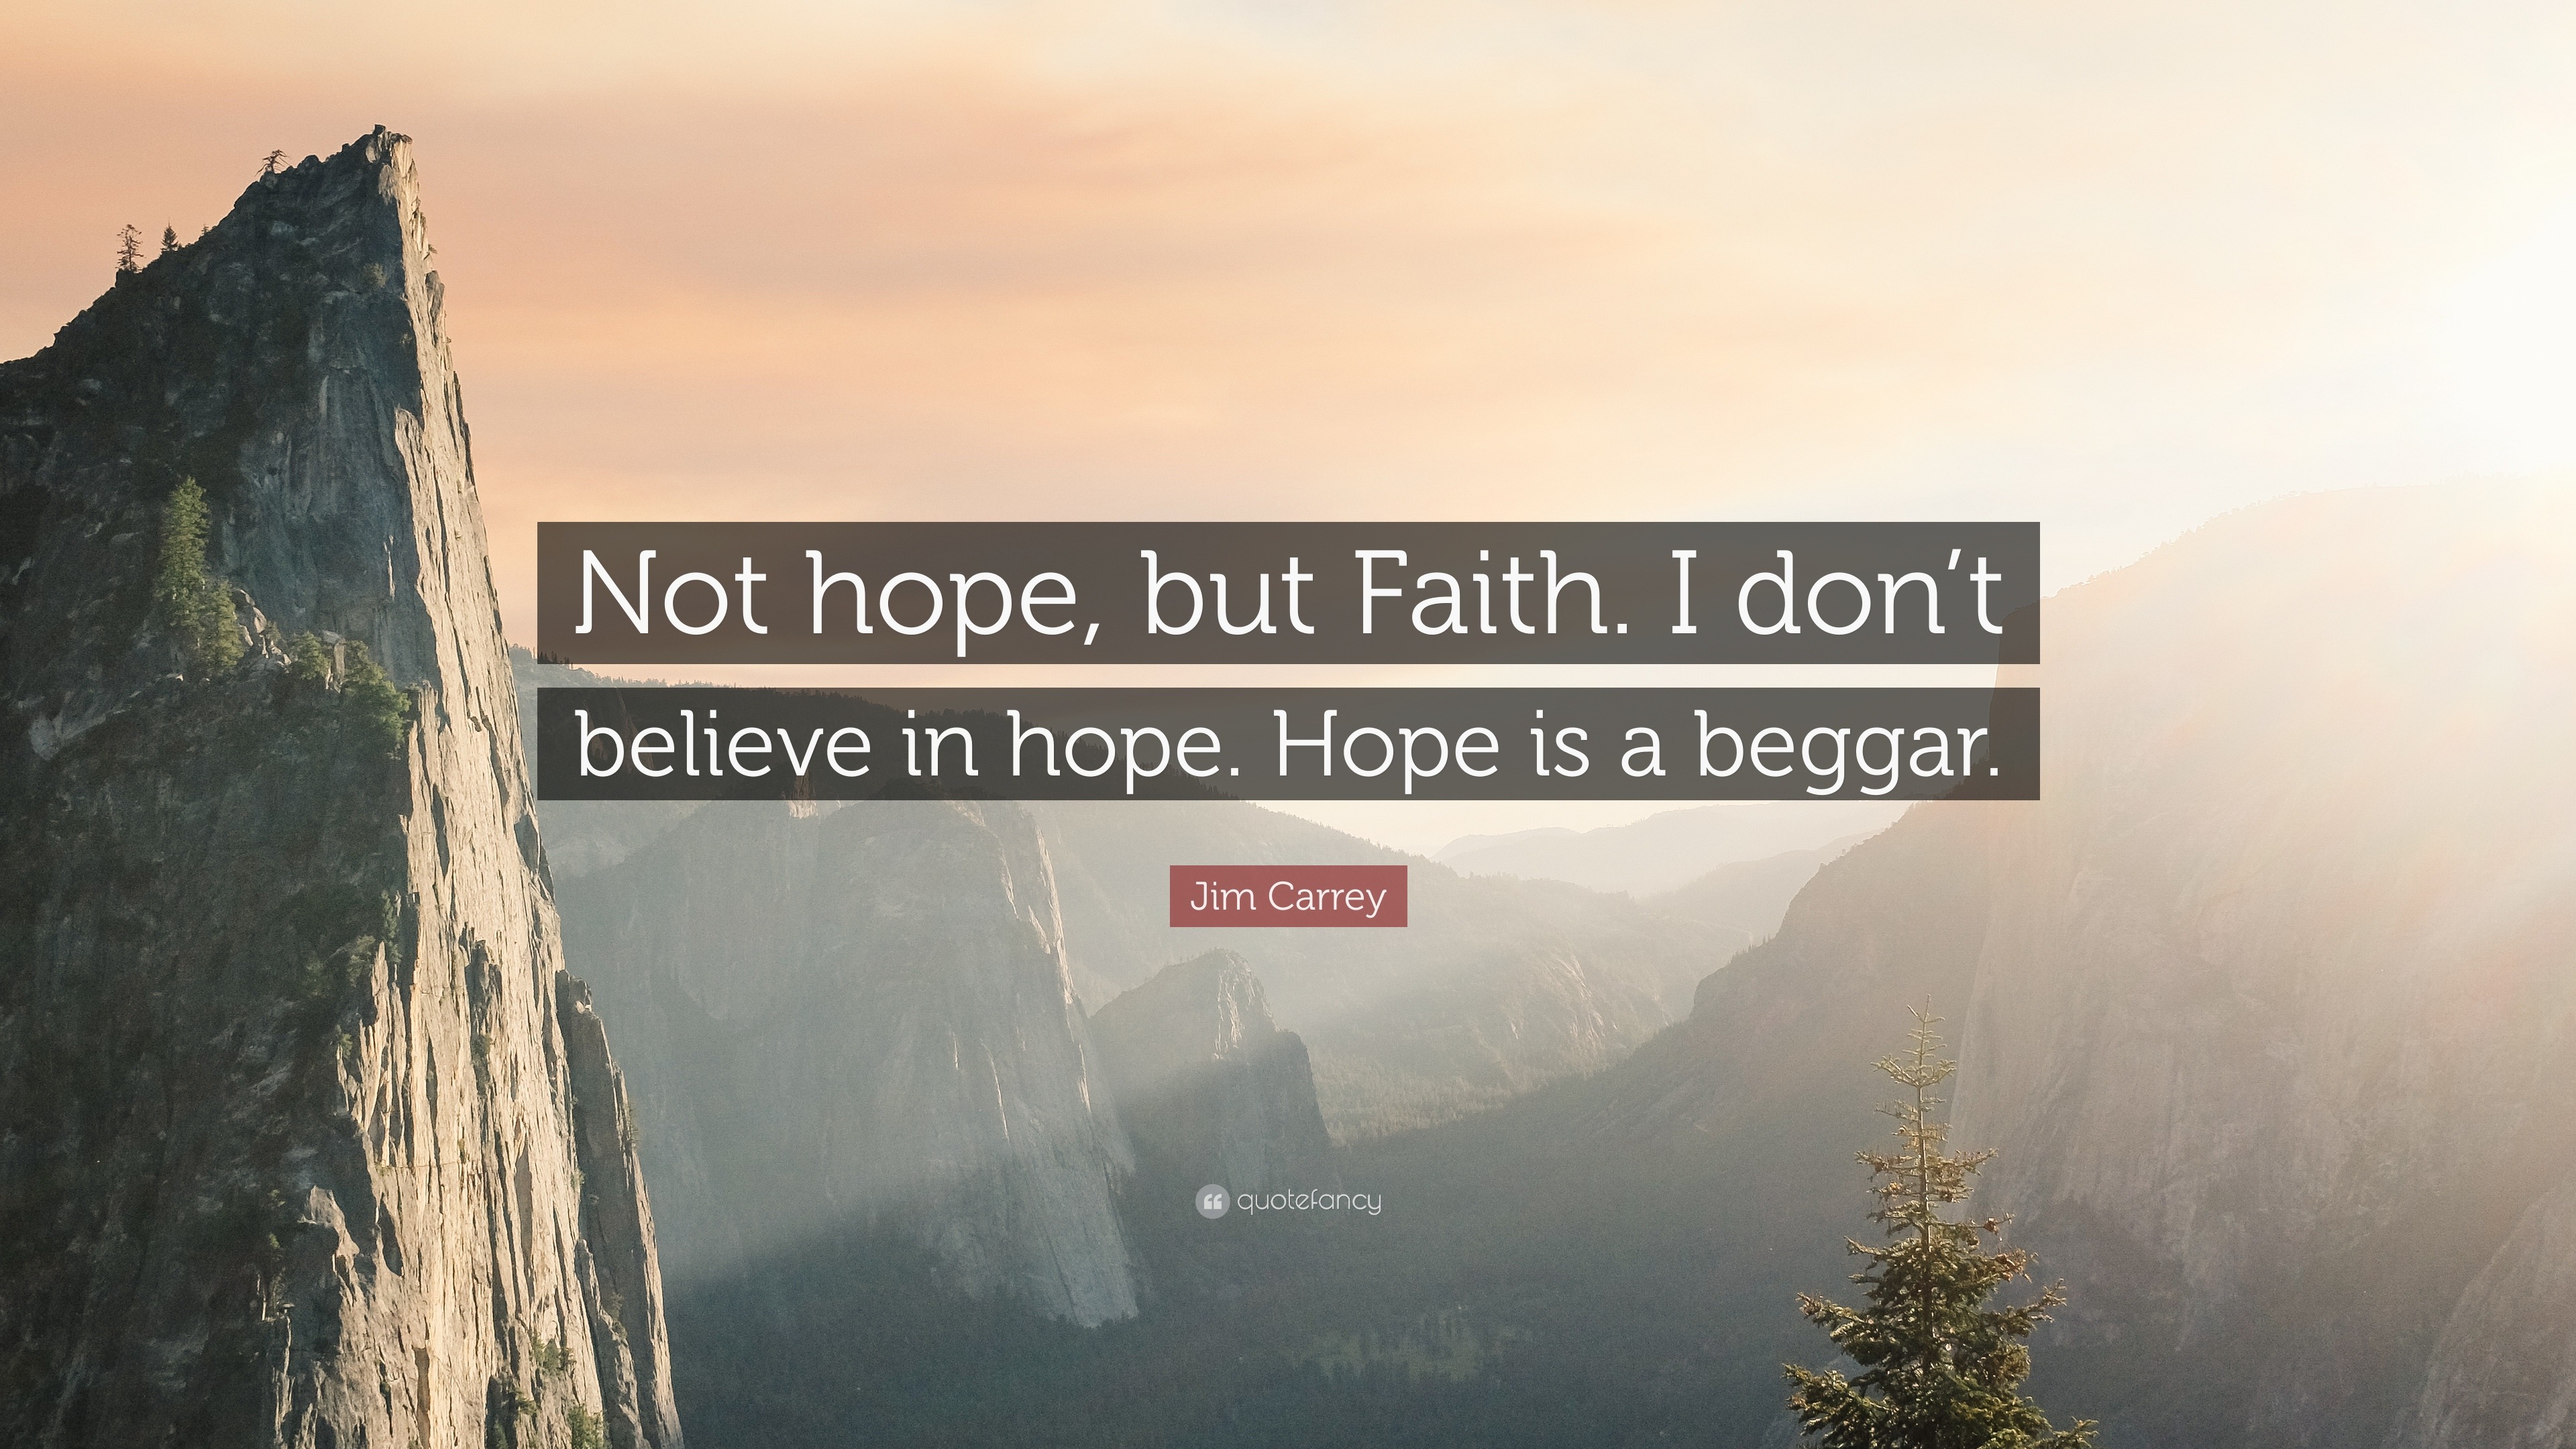 Jim Carrey Quote “not Hope But Faith I Don T Believe In Hope Hope Is A Beggar ”